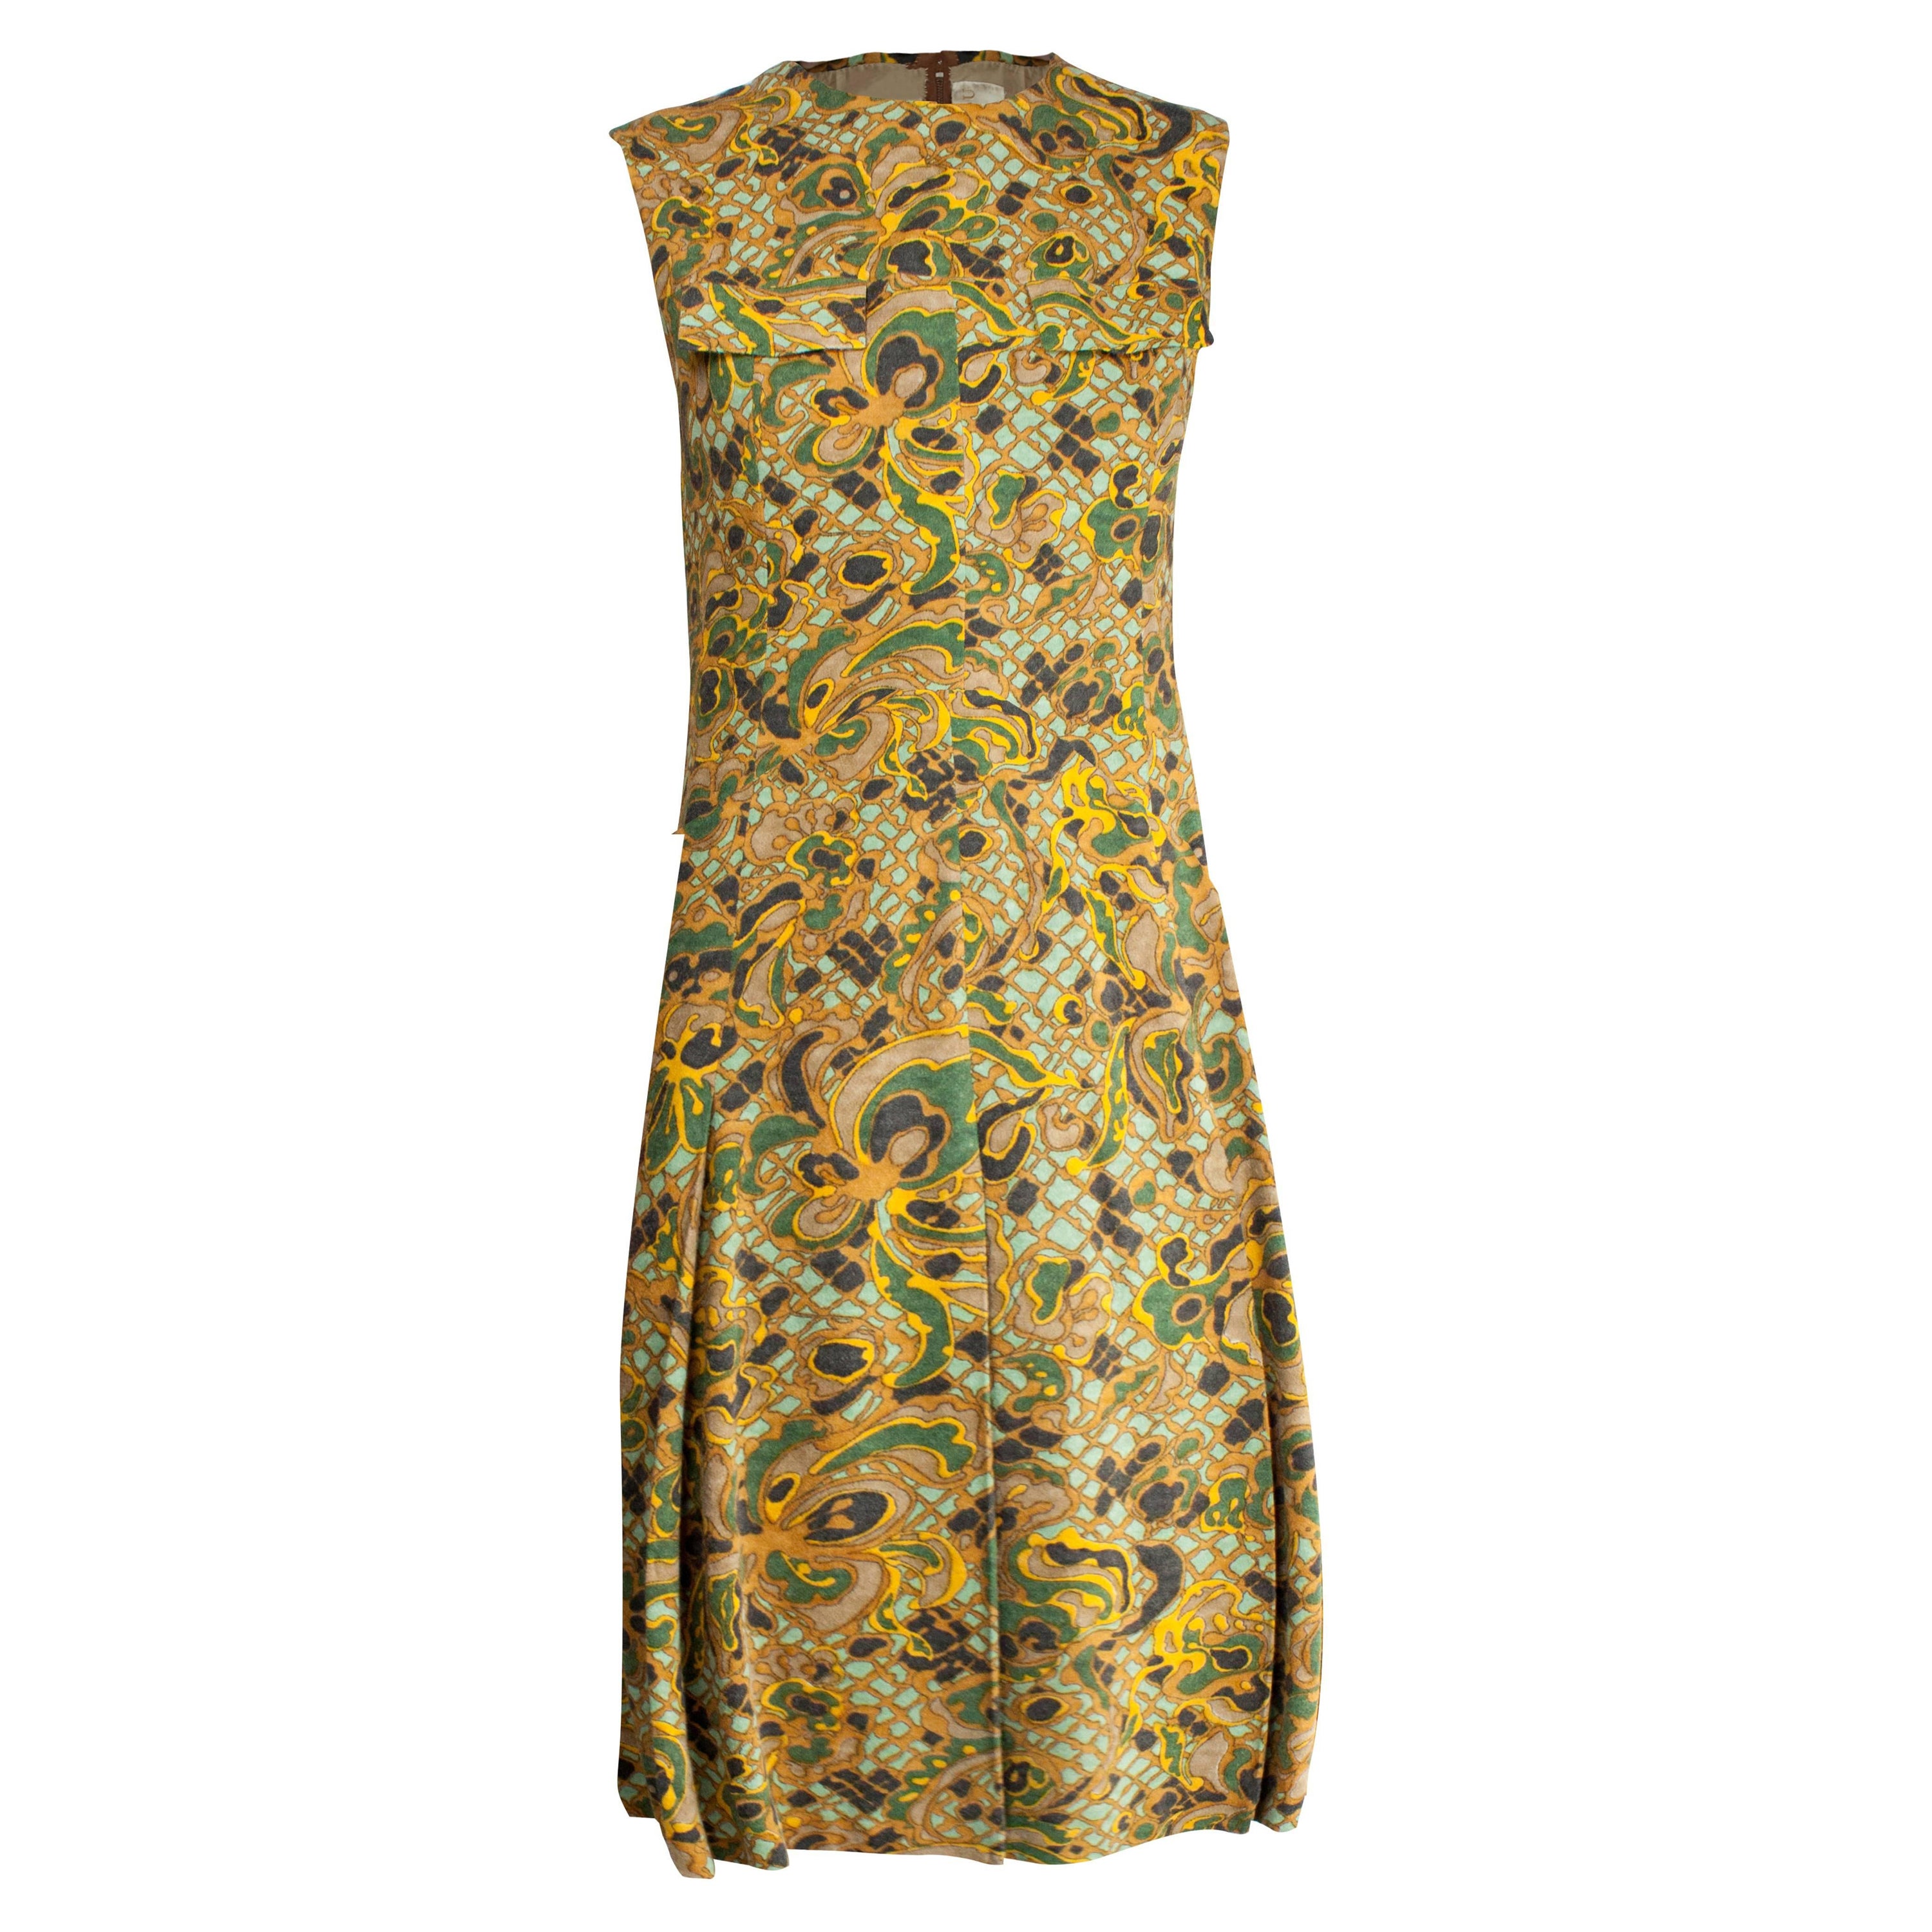 Jean Patou stylised floral motifs brushed wool dress, circa 1960s For Sale